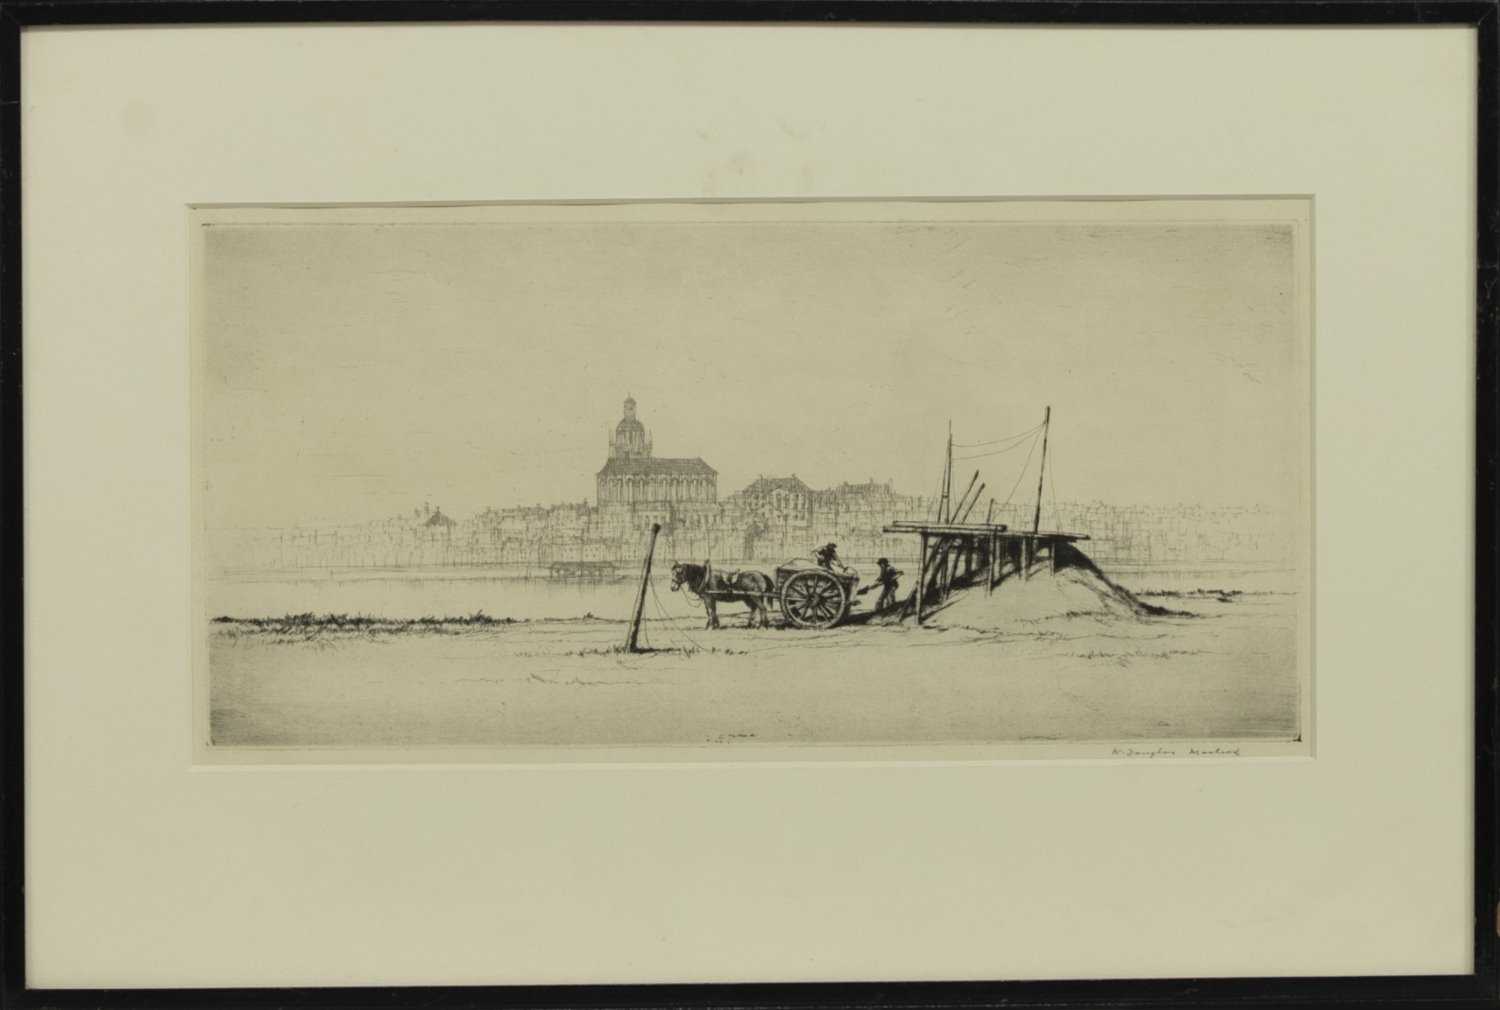 ON THE TAGUS, AN ETCHING BY WILLIAM DOUGLAS MACLEOD